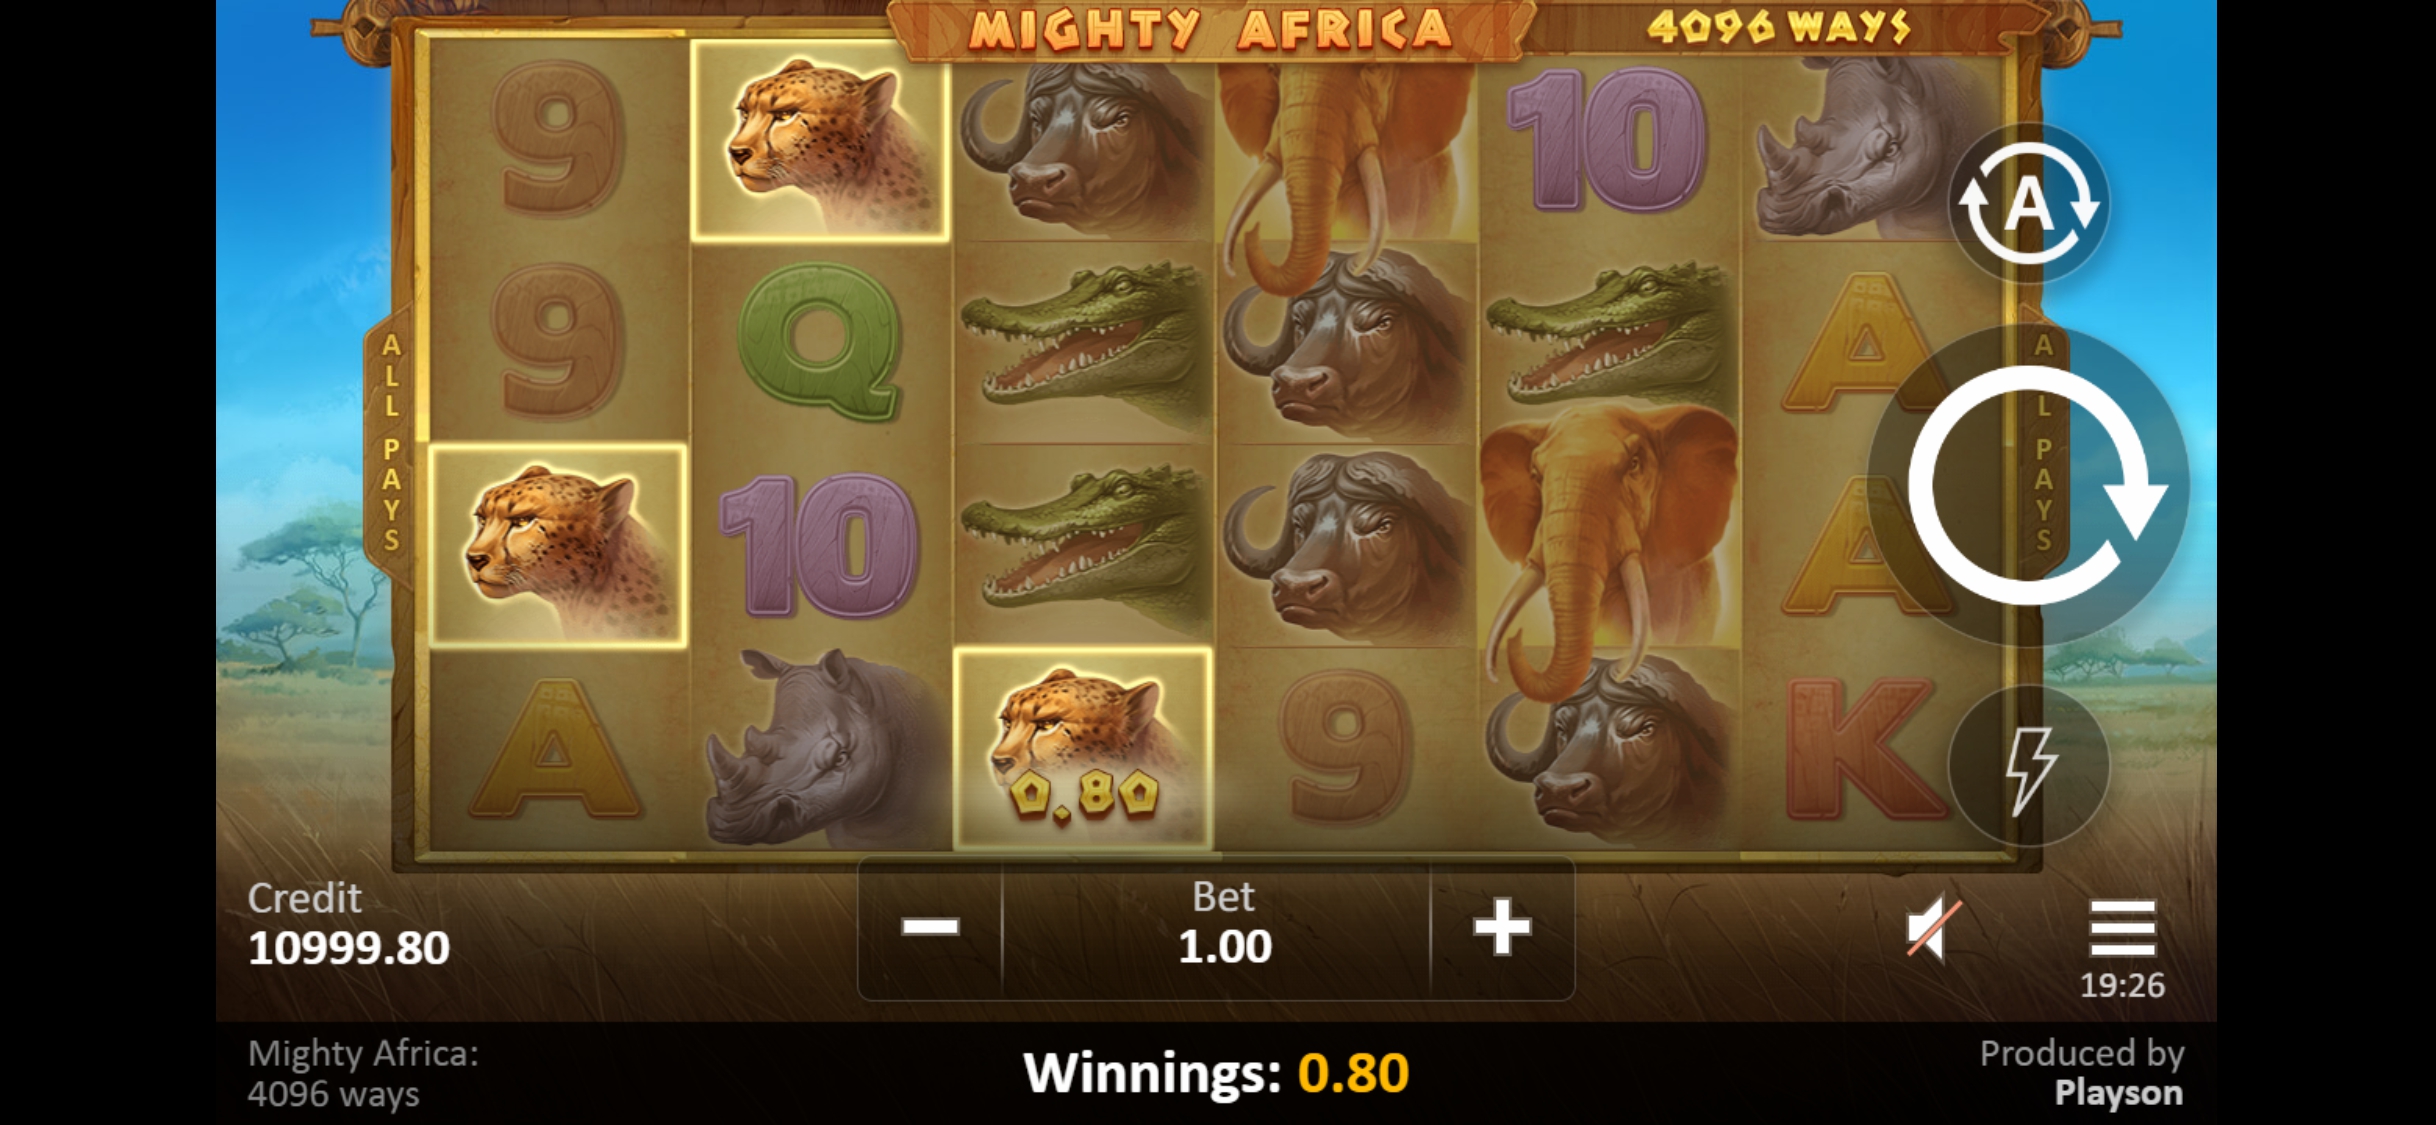 Mr X Bet Casino Mobile Slot Games Review